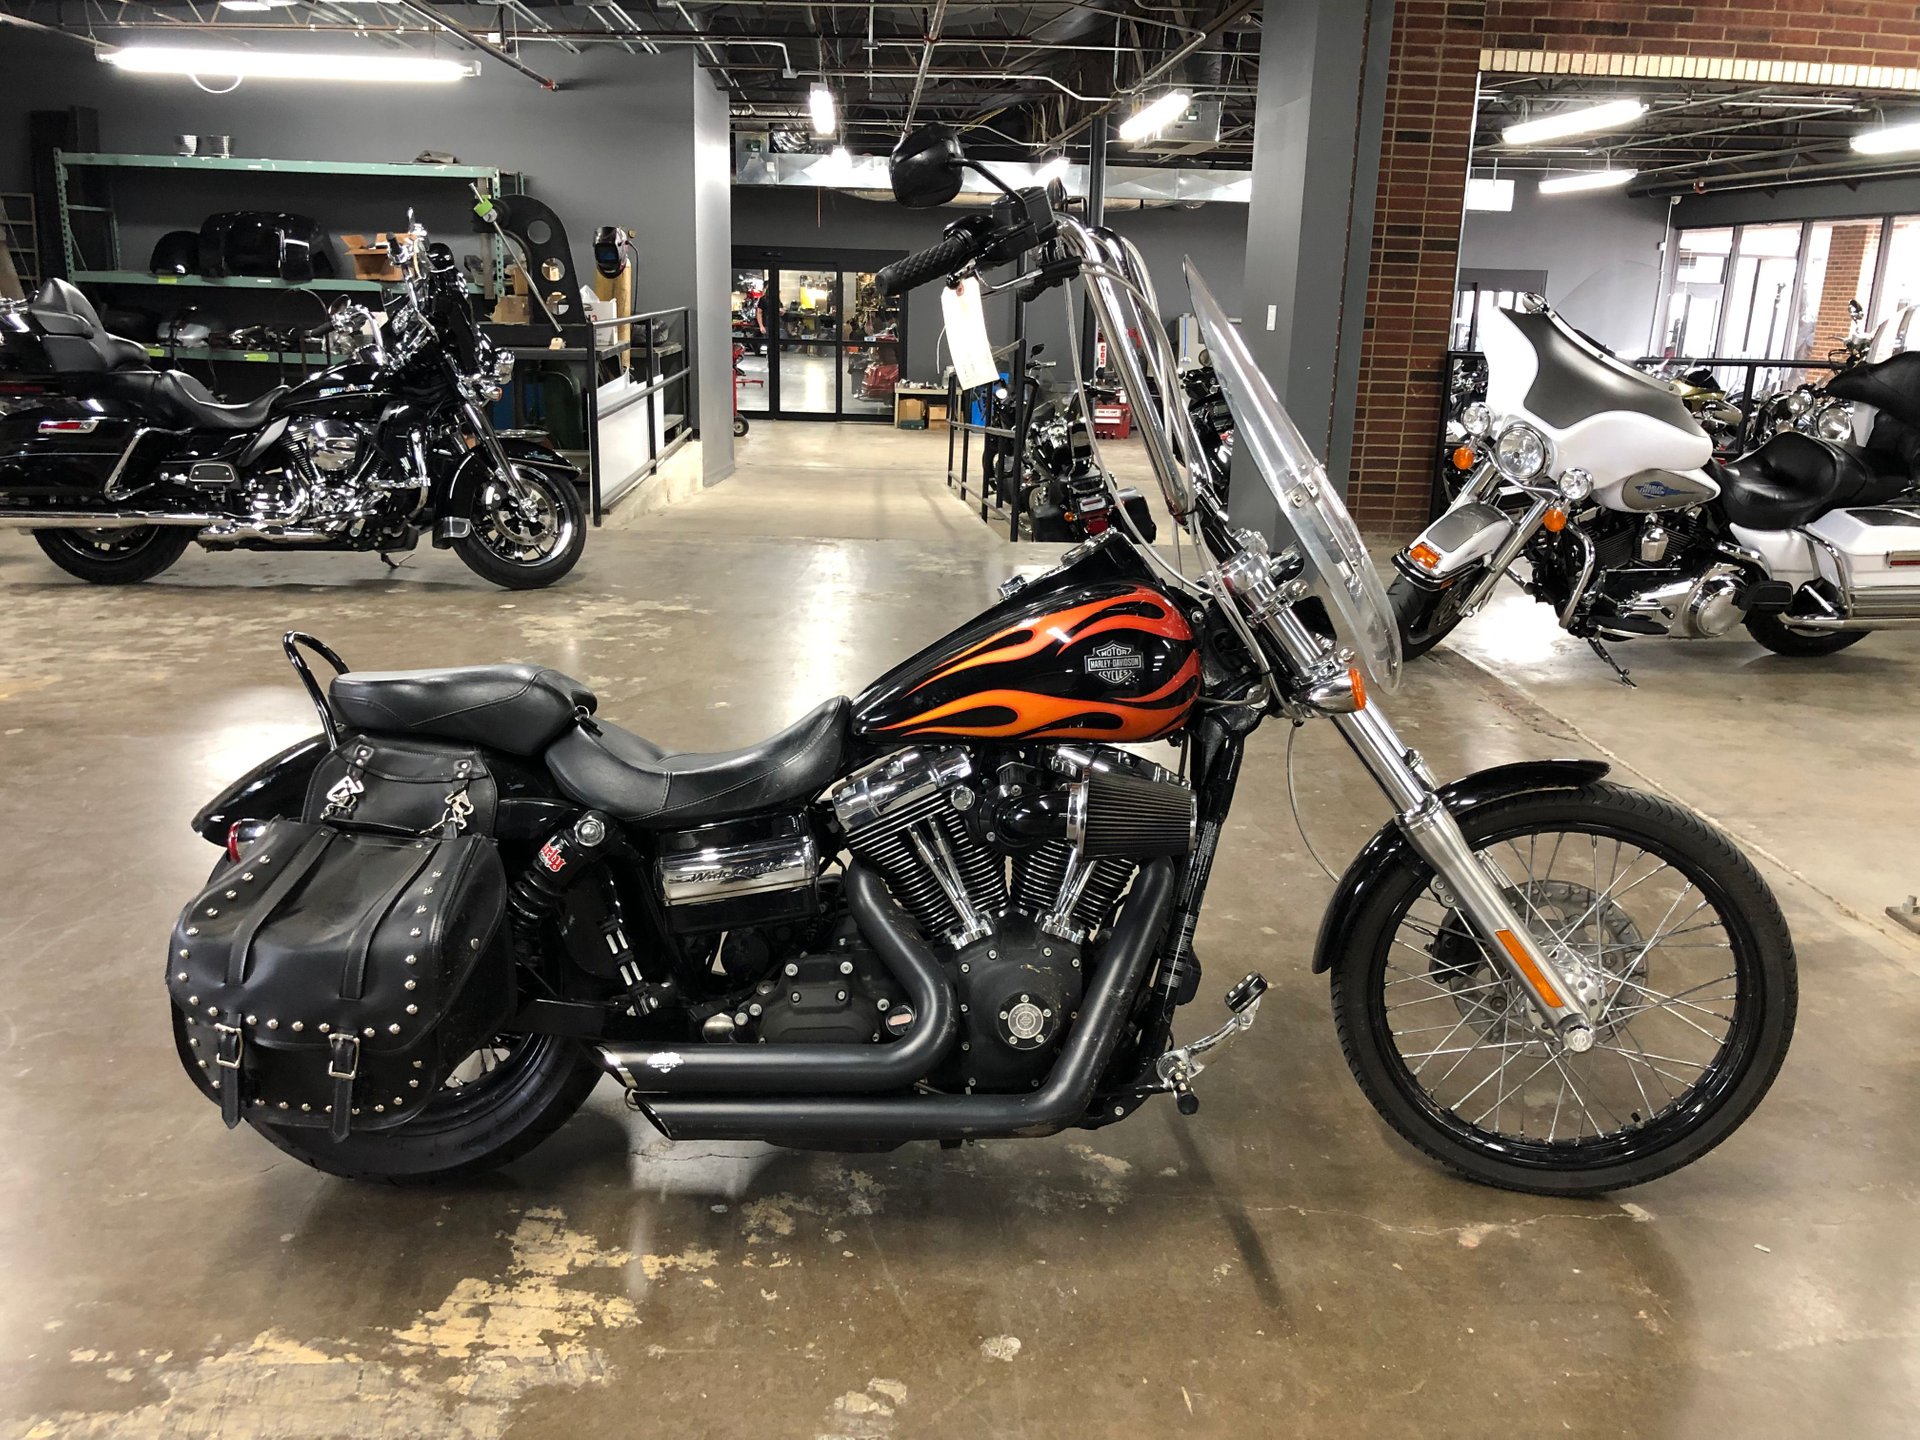 2011 Harley-Davidson Dyna Wide Glide | American Motorcycle Trading ...